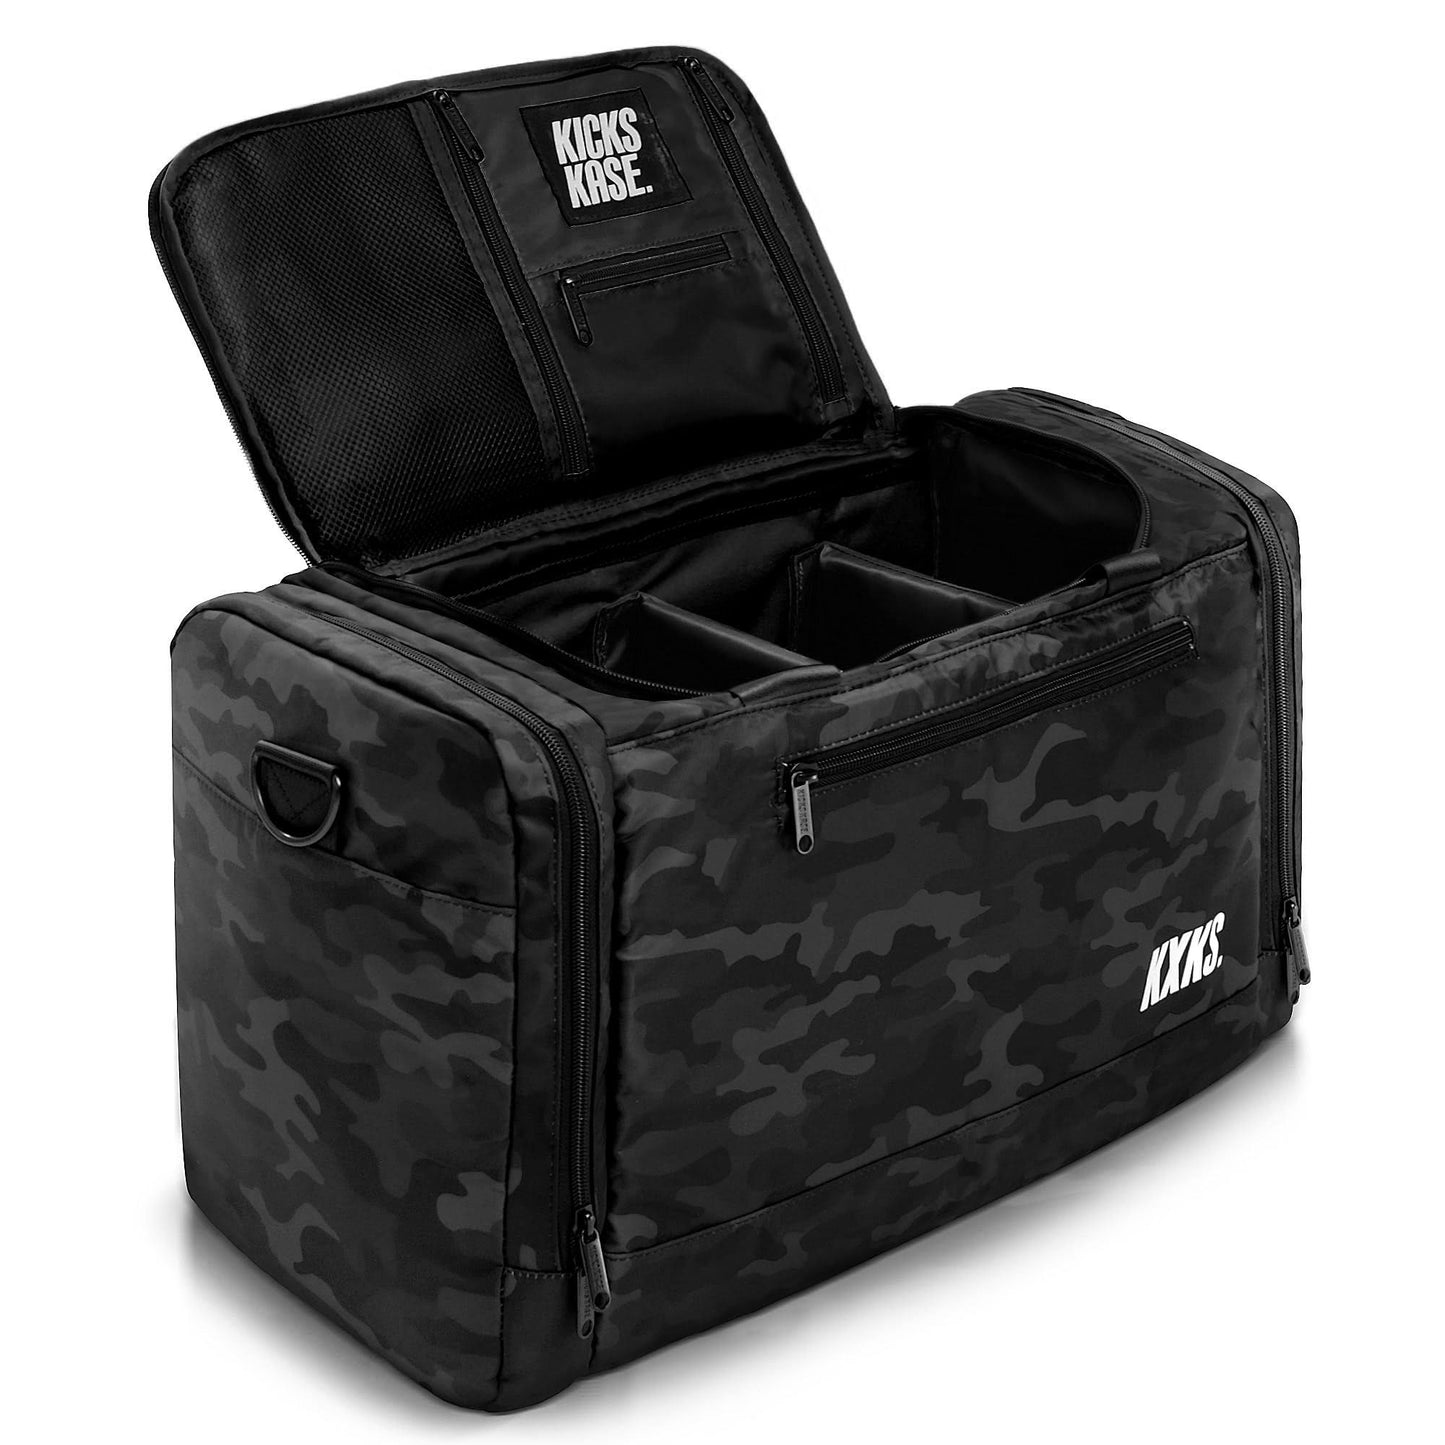 (Kicks Kase) Camo Premium Sneaker Bag & Travel Duffel Bag - 3 Adjustable Compartment Dividers - For Shoes, Clothing And Gym